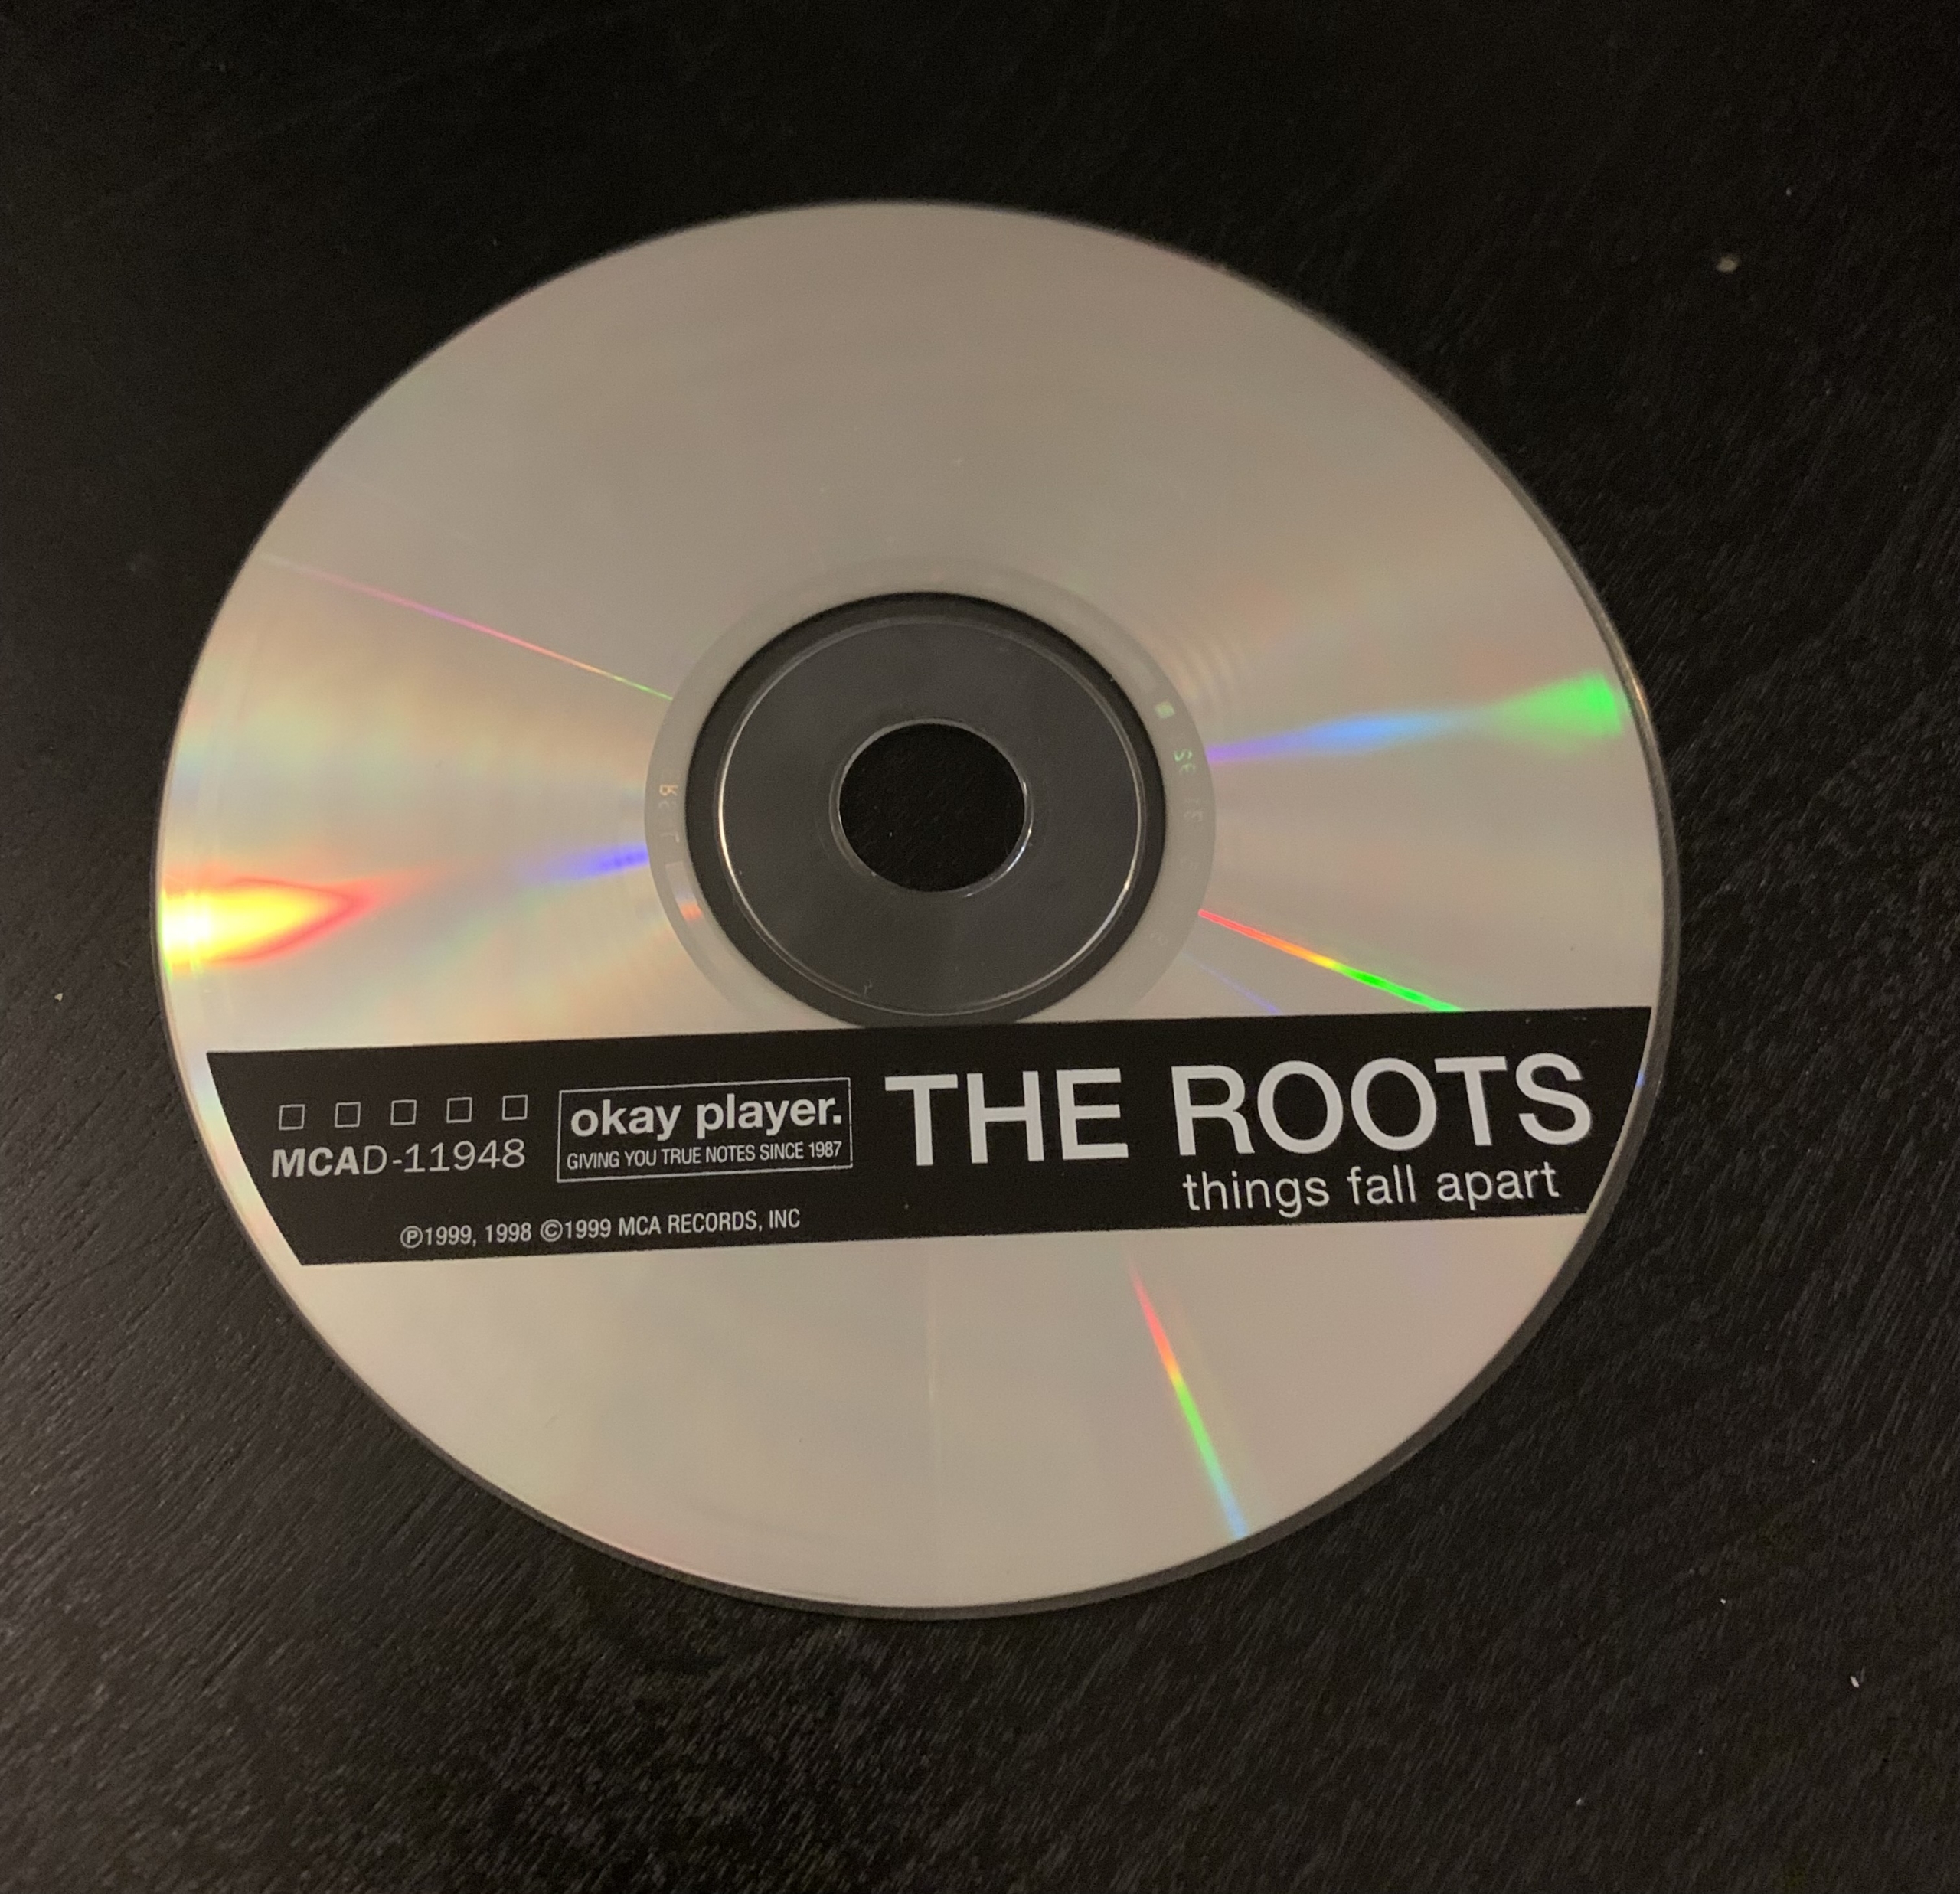 Most known as being Jimmy Fallon’s house band on The Tonight Show, The Roots have been killin’ it with their 'live band meets hip hop flair' for decades. This song is just the right amount of "Adrenaline" to help you level up your workout. 